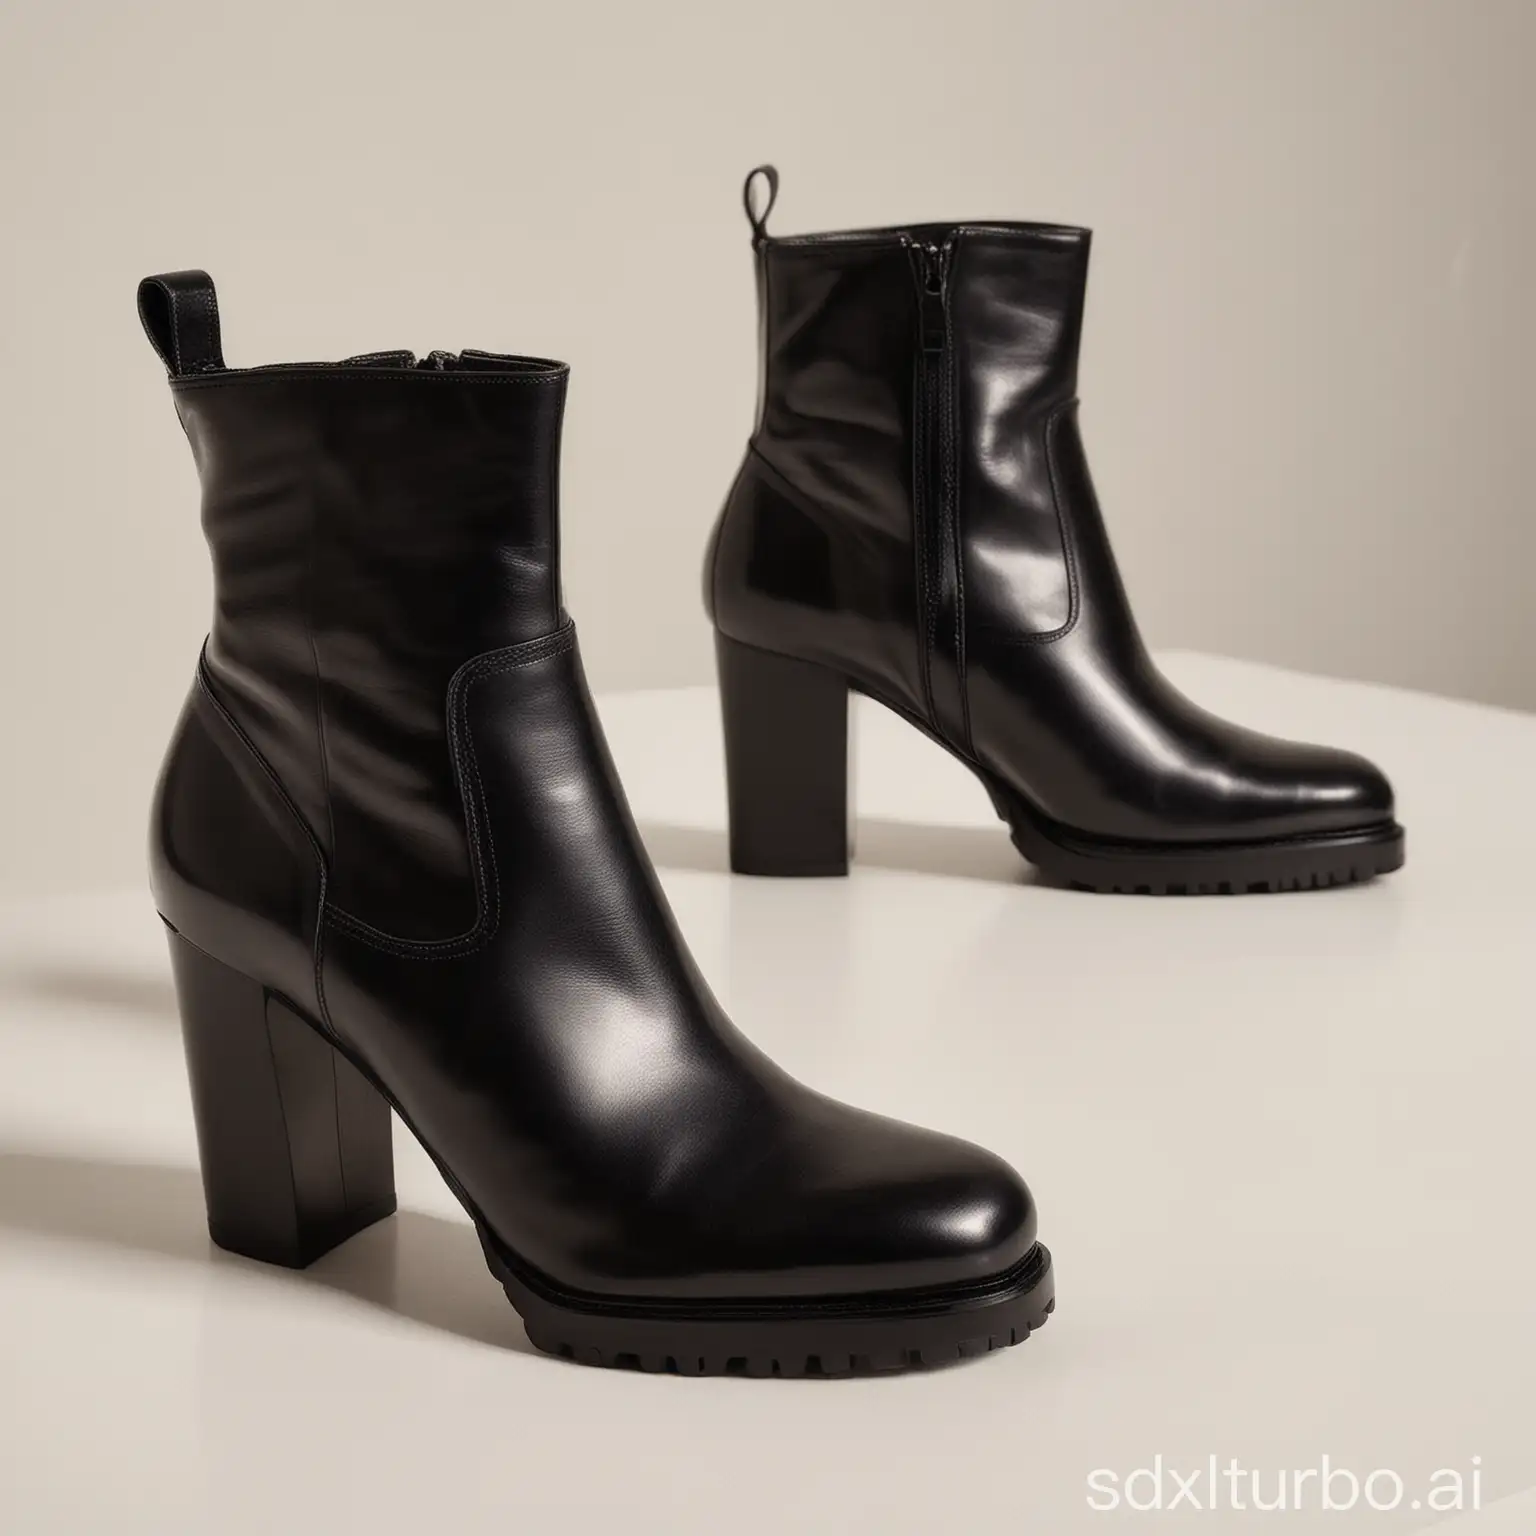 A close-up of a pair of black leather ankle boots with a chunky heel. The boots are placed on a white background, and the light is shining on them to highlight their sleek design and luxurious materials.